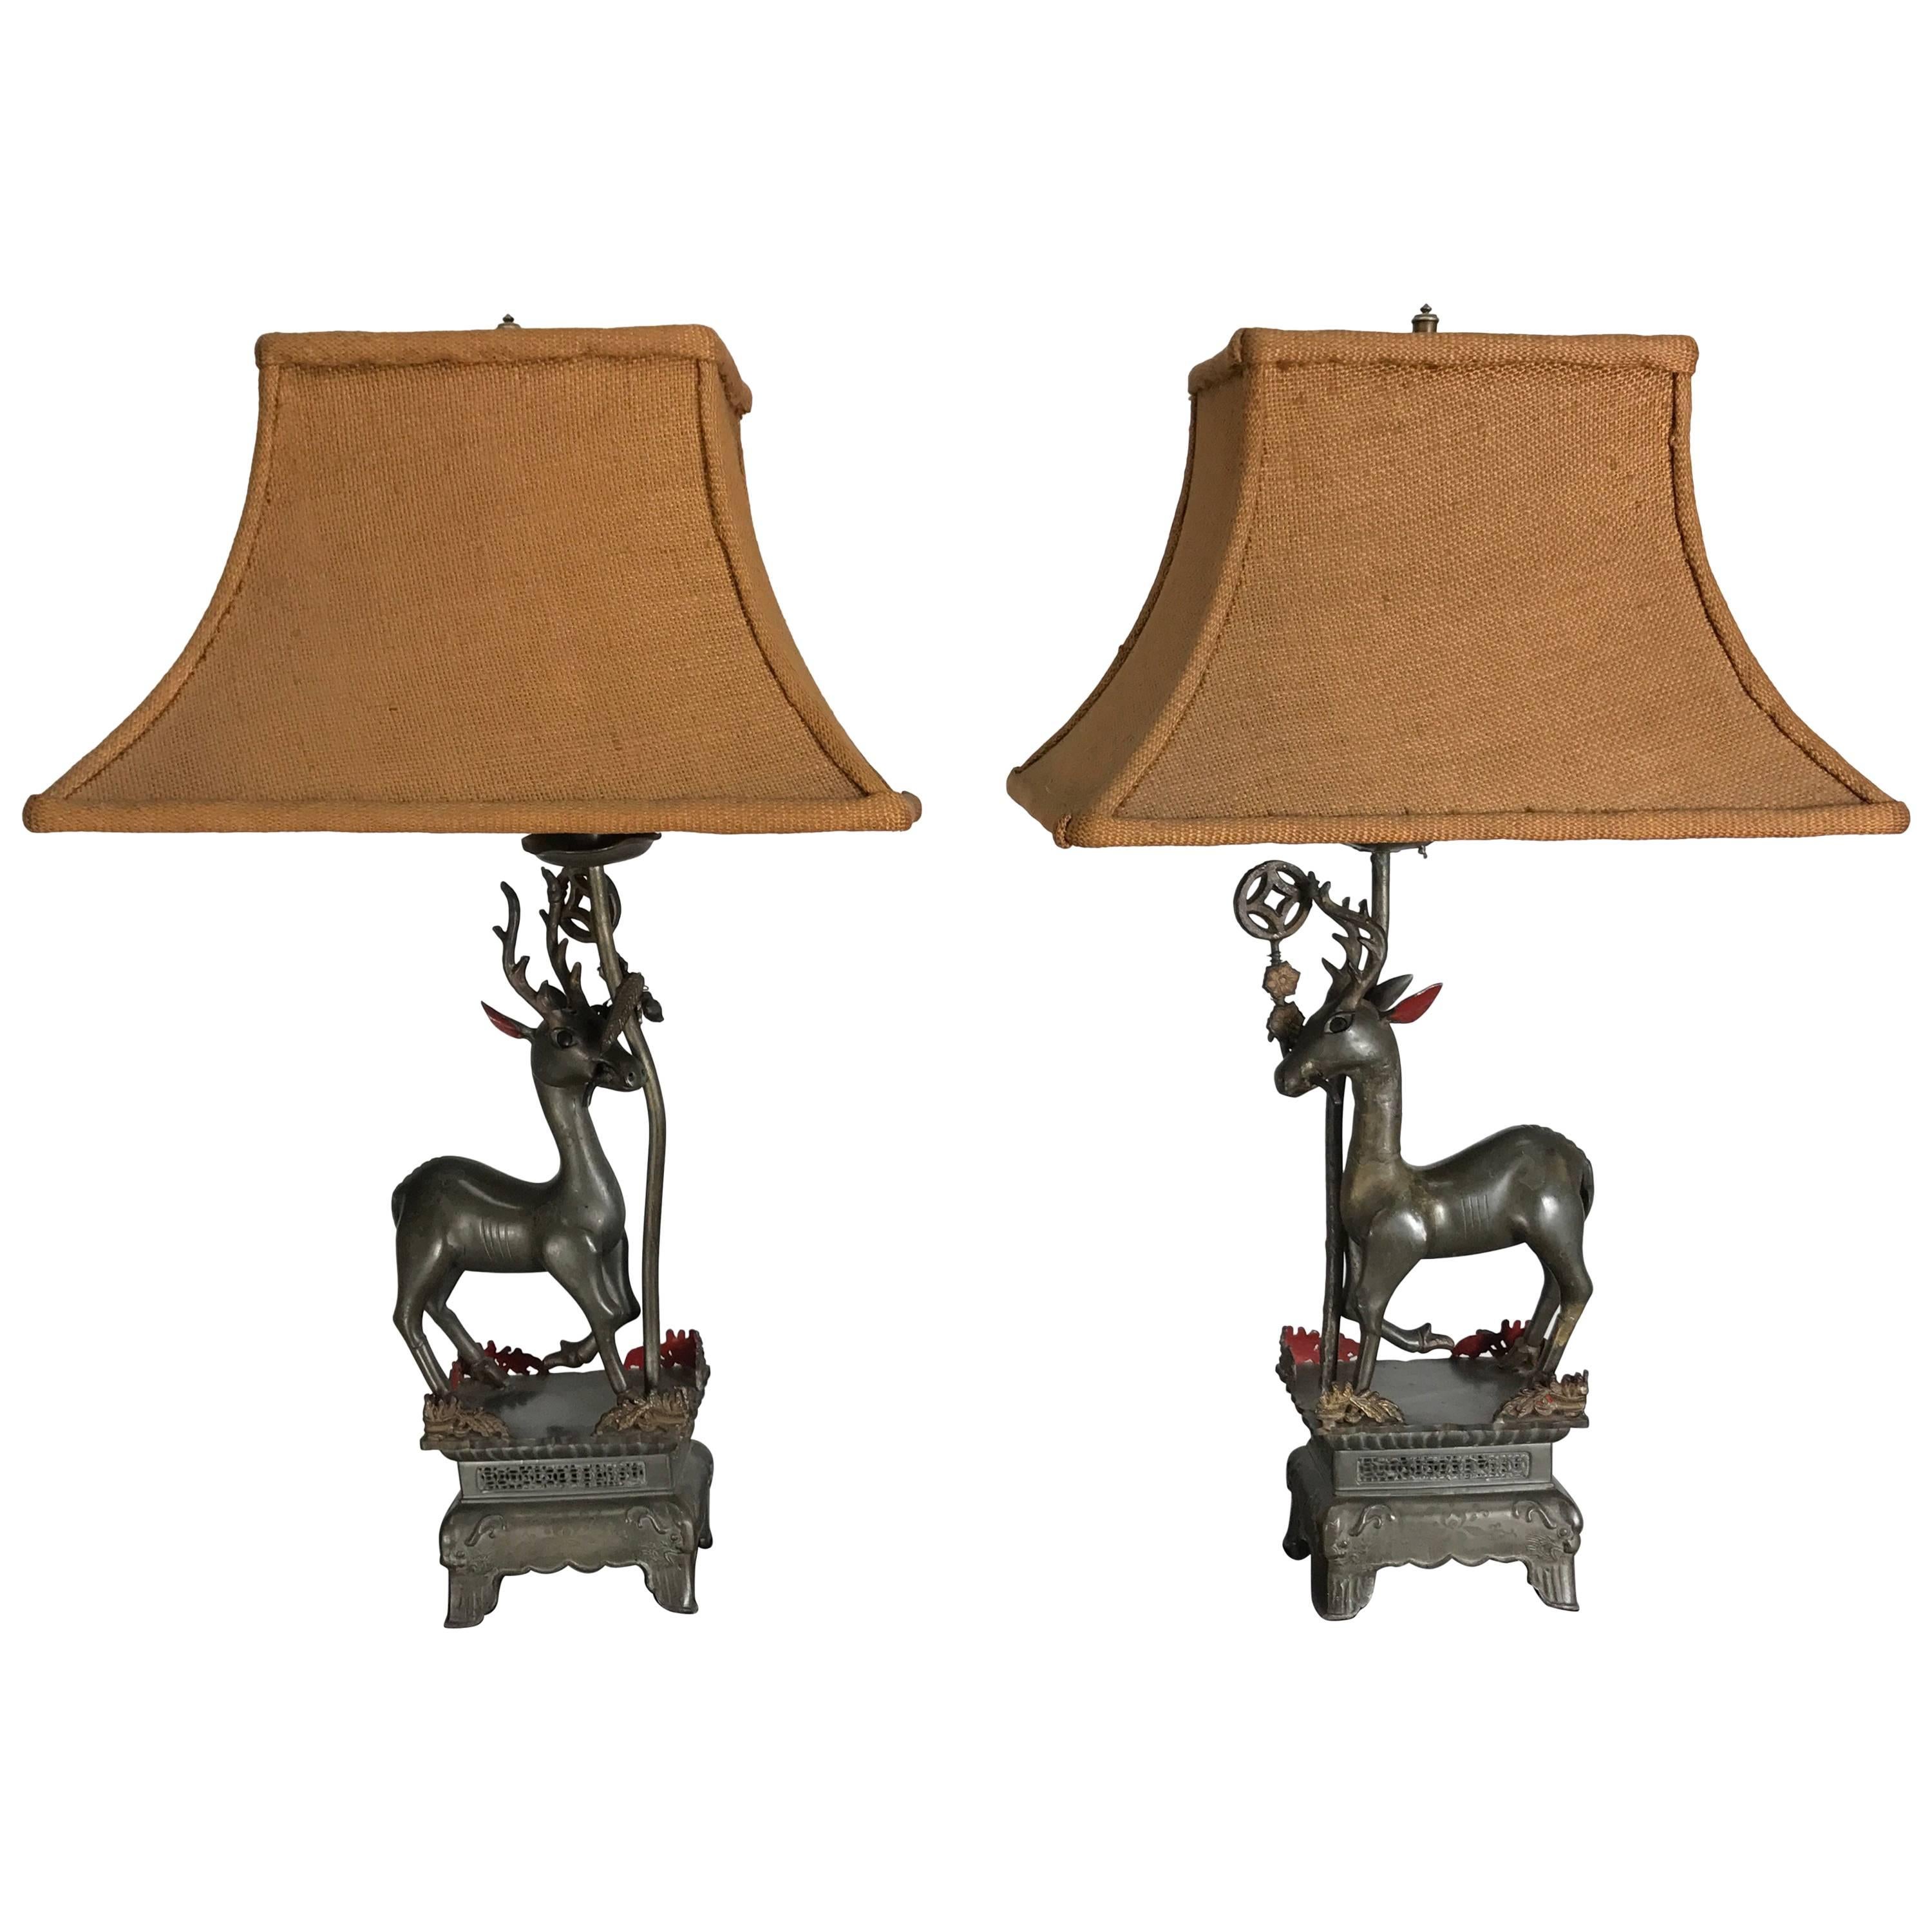 Pair of Antique Chinese Pewter Gazelle Themed Table Lamps